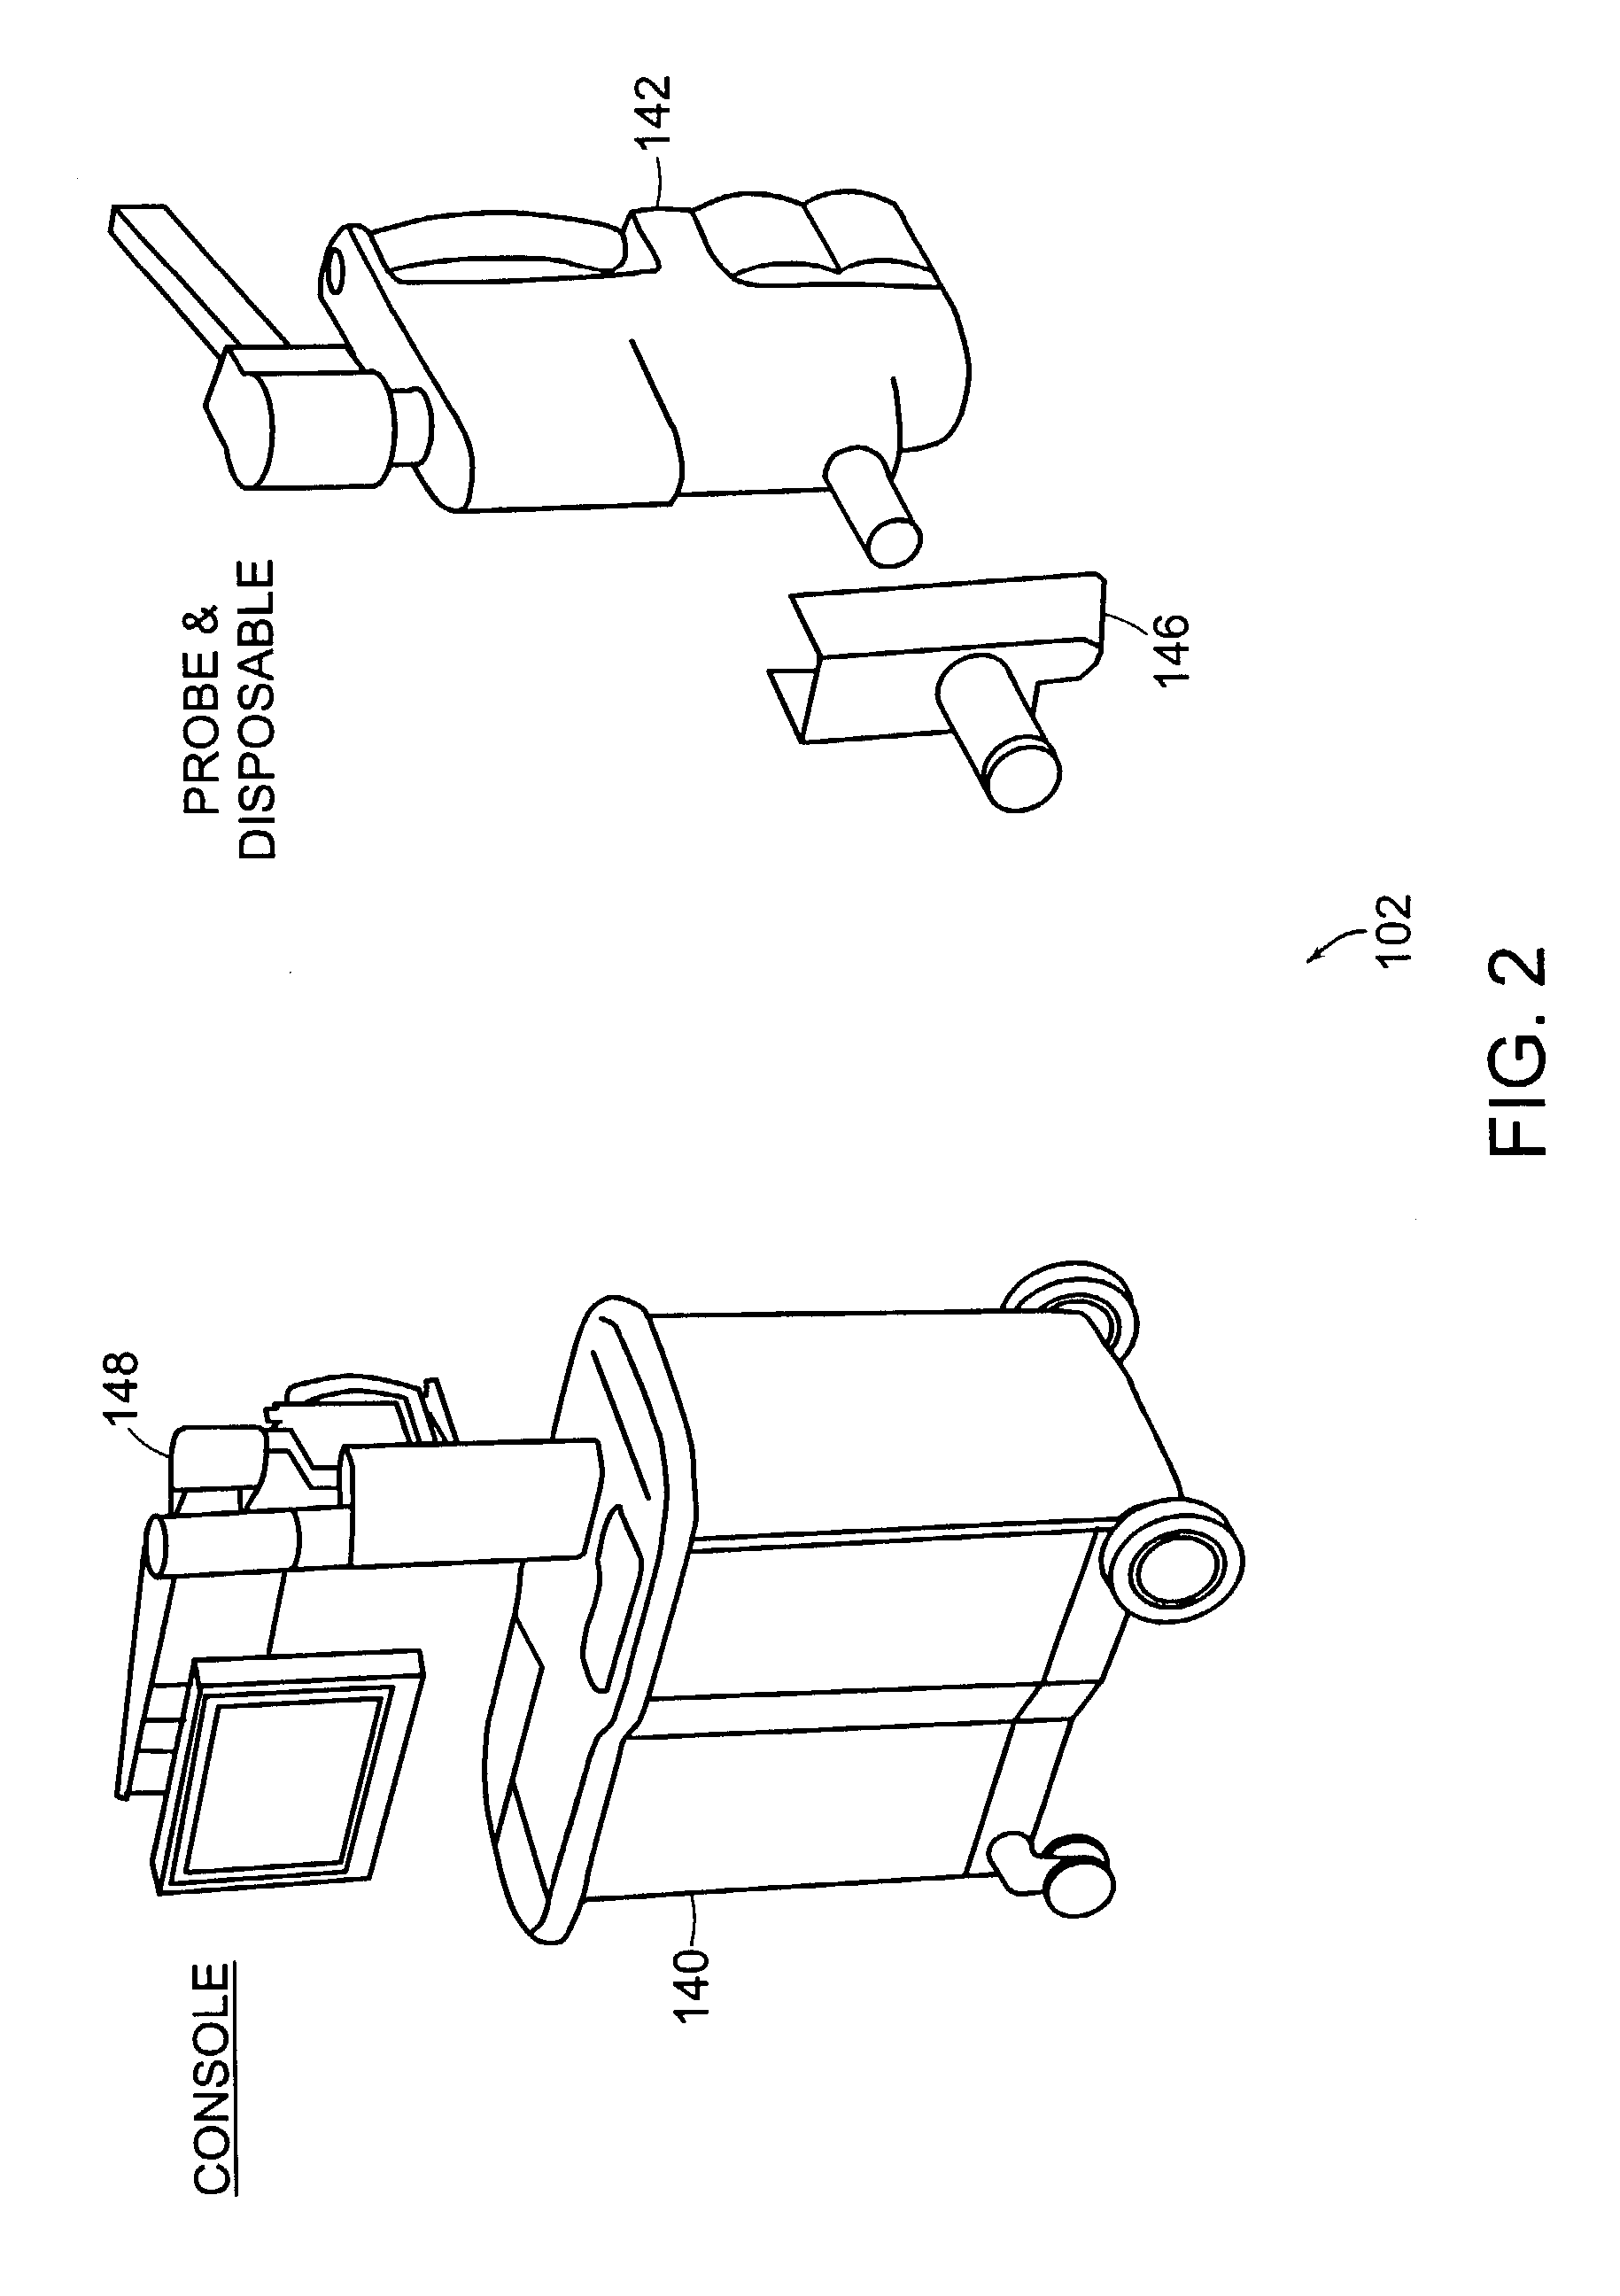 Methods and apparatus for characterization of tissue samples